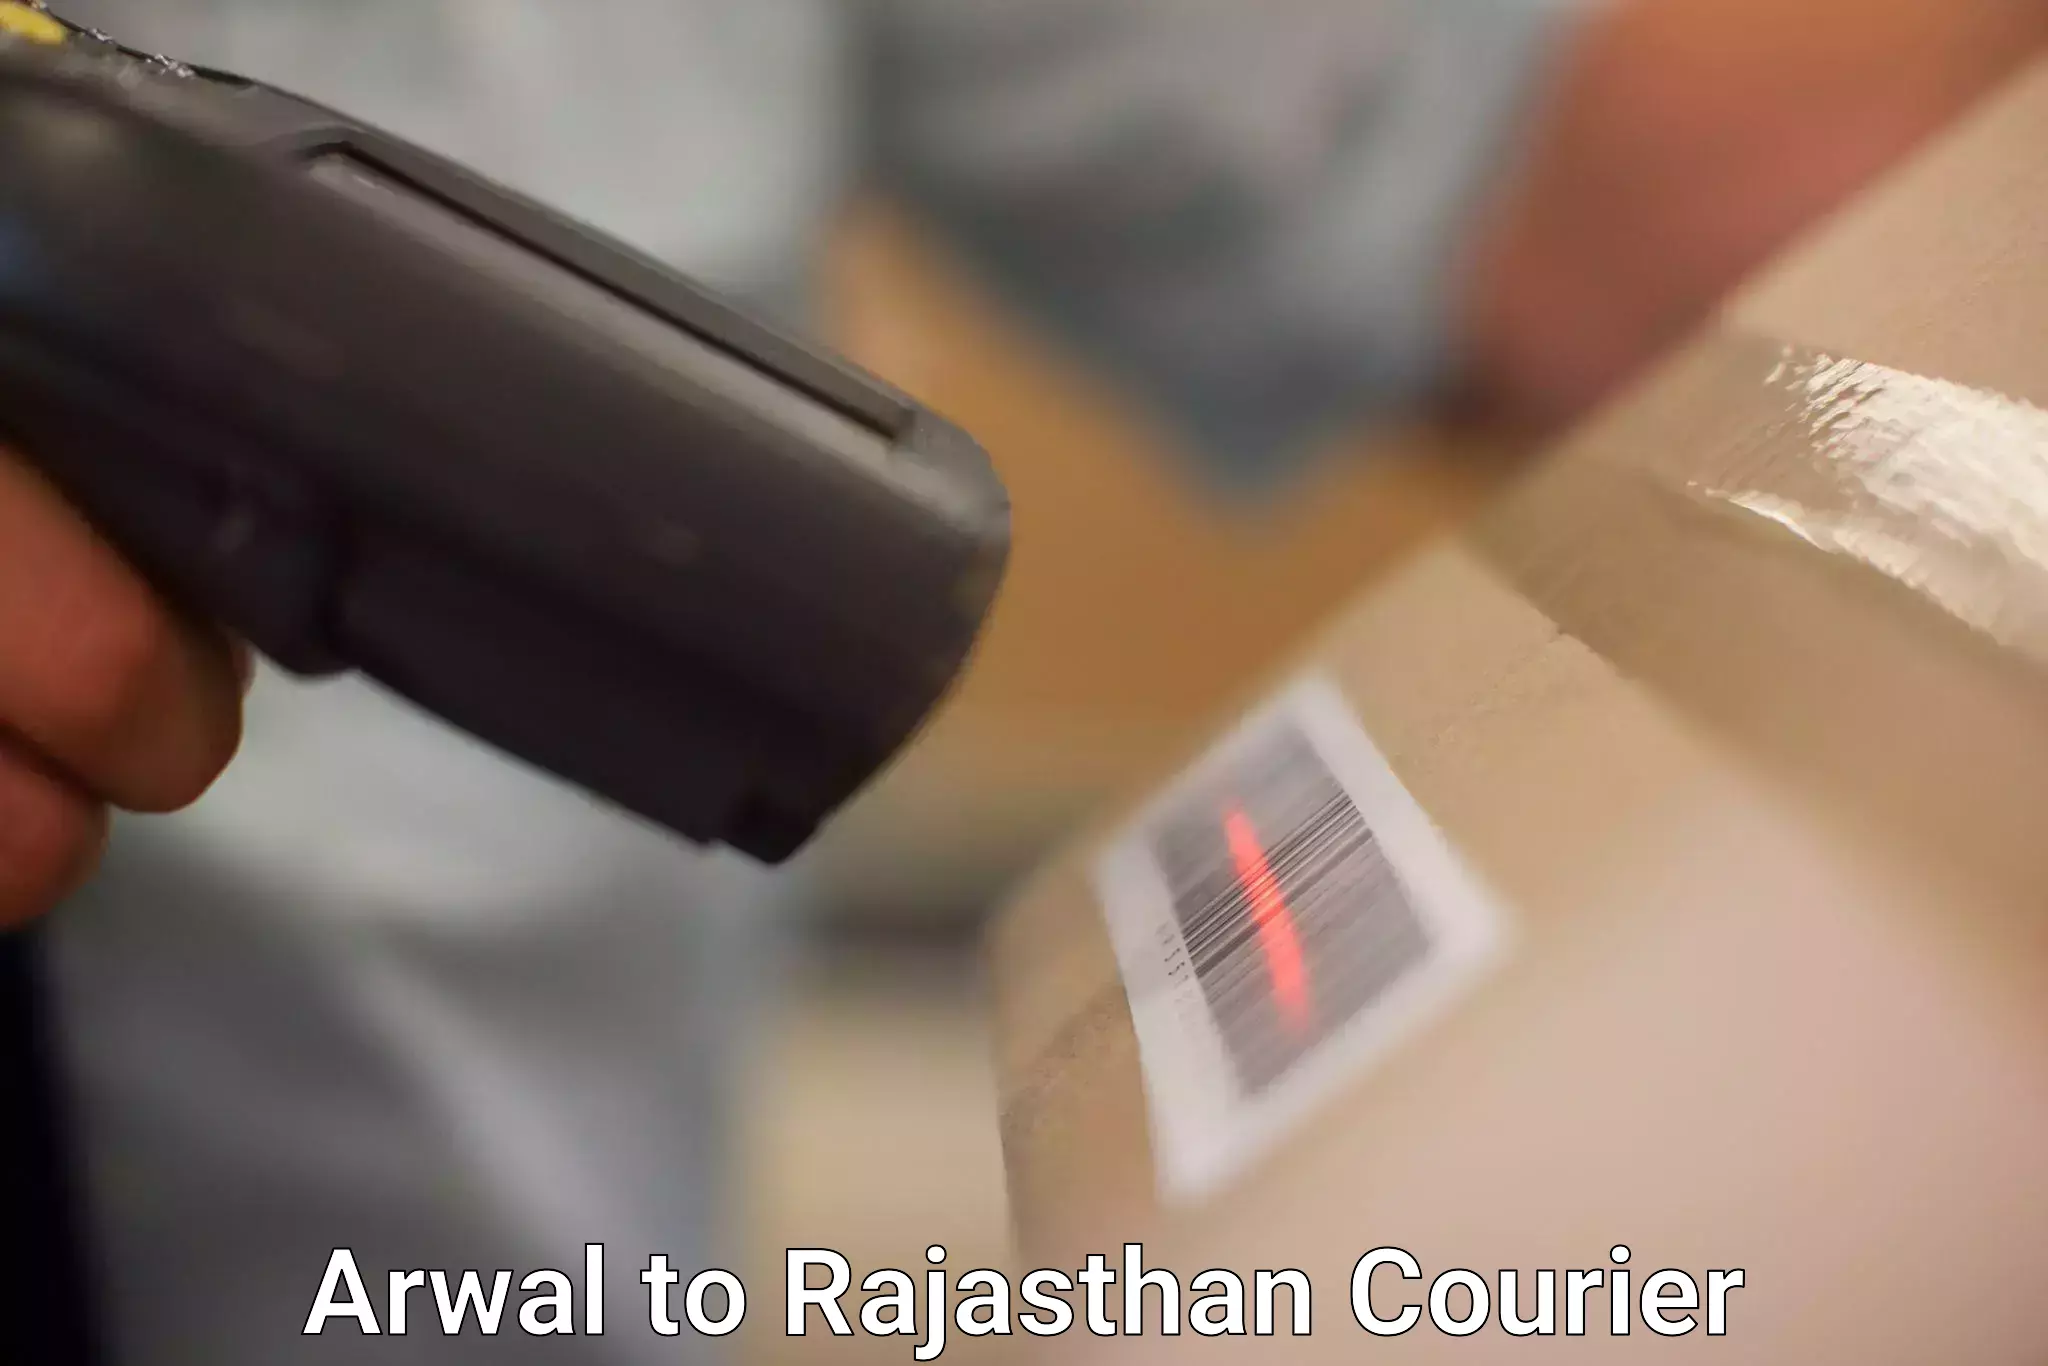 Cash on delivery service Arwal to Rajasthan